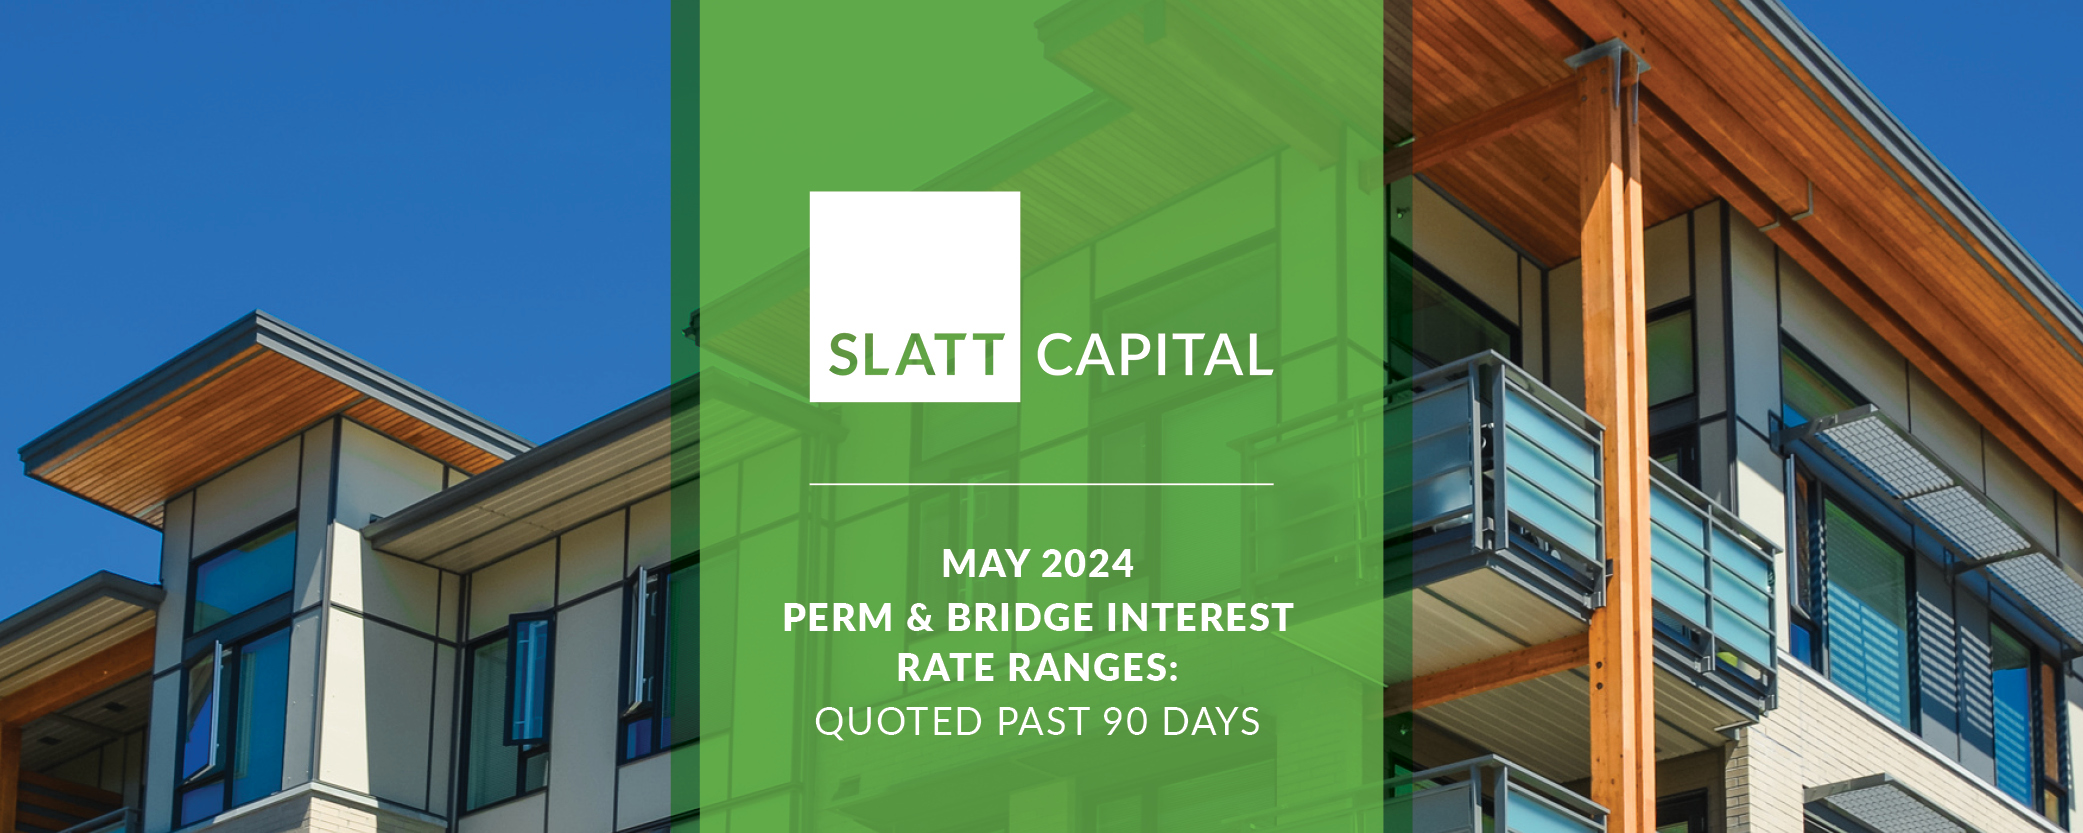 May 2024 interest rate ranges: quoted past 90 days